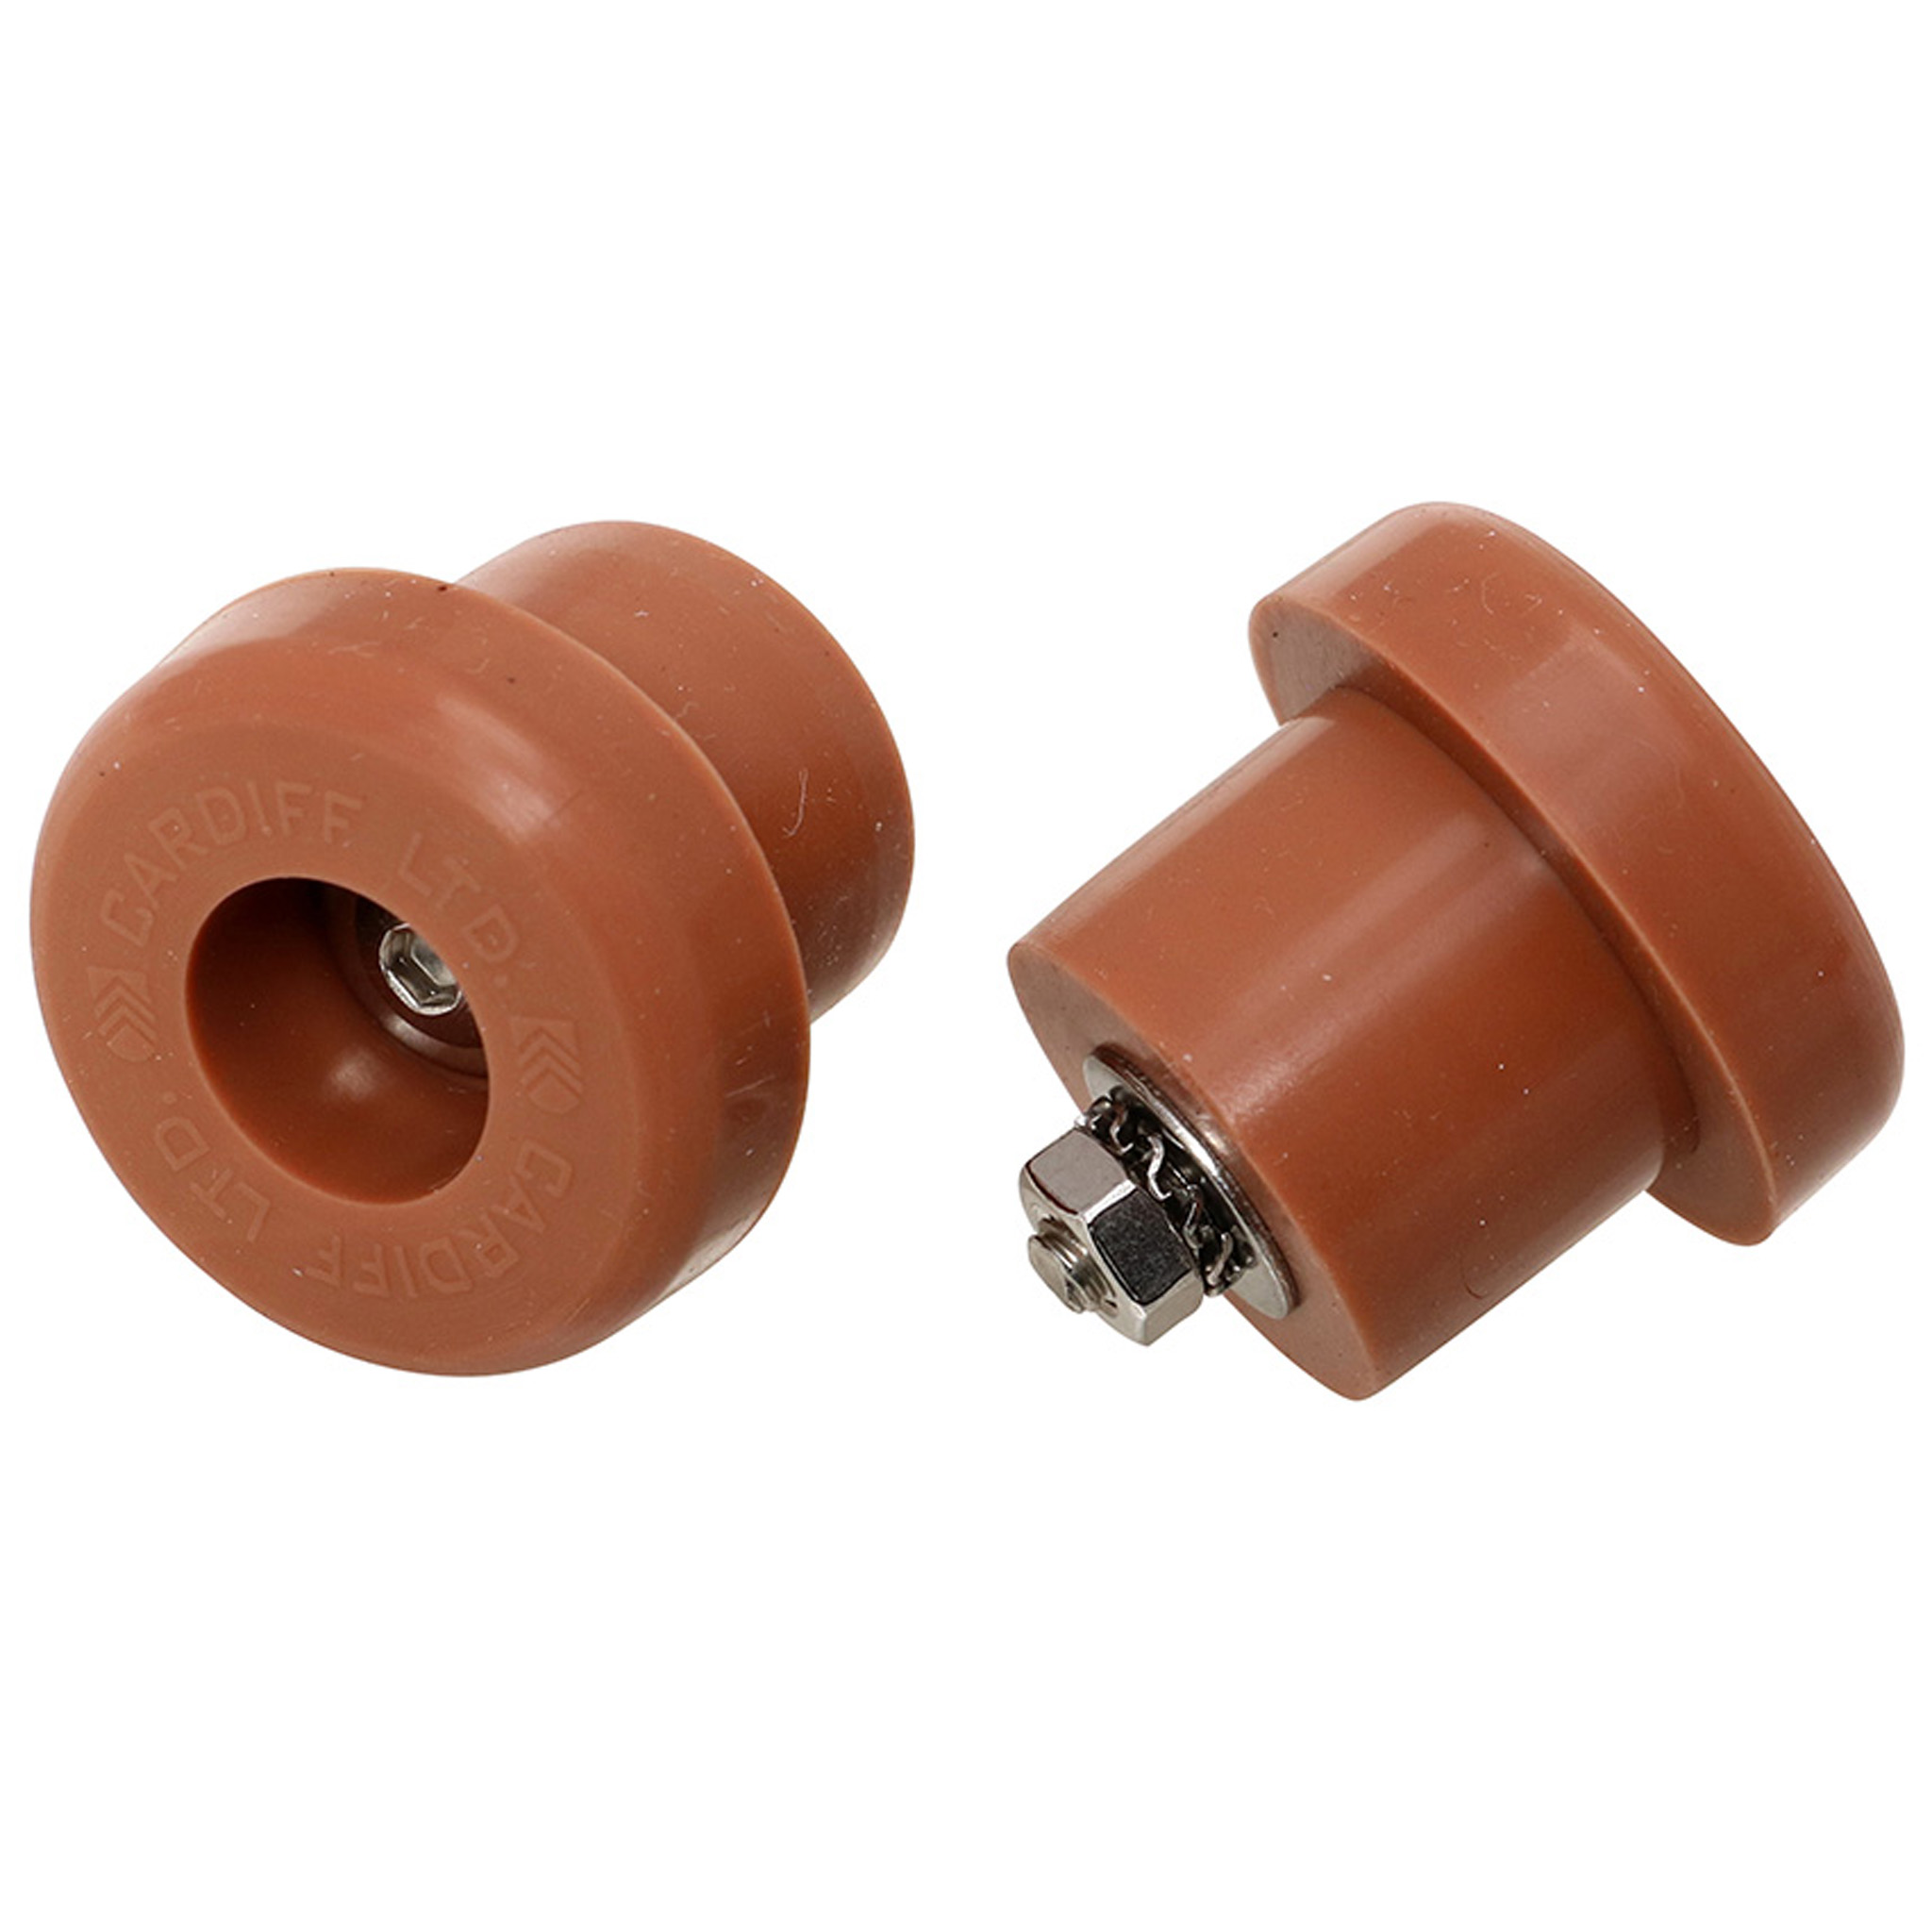 Cardiff Silicone Bar End Plugs, Natural